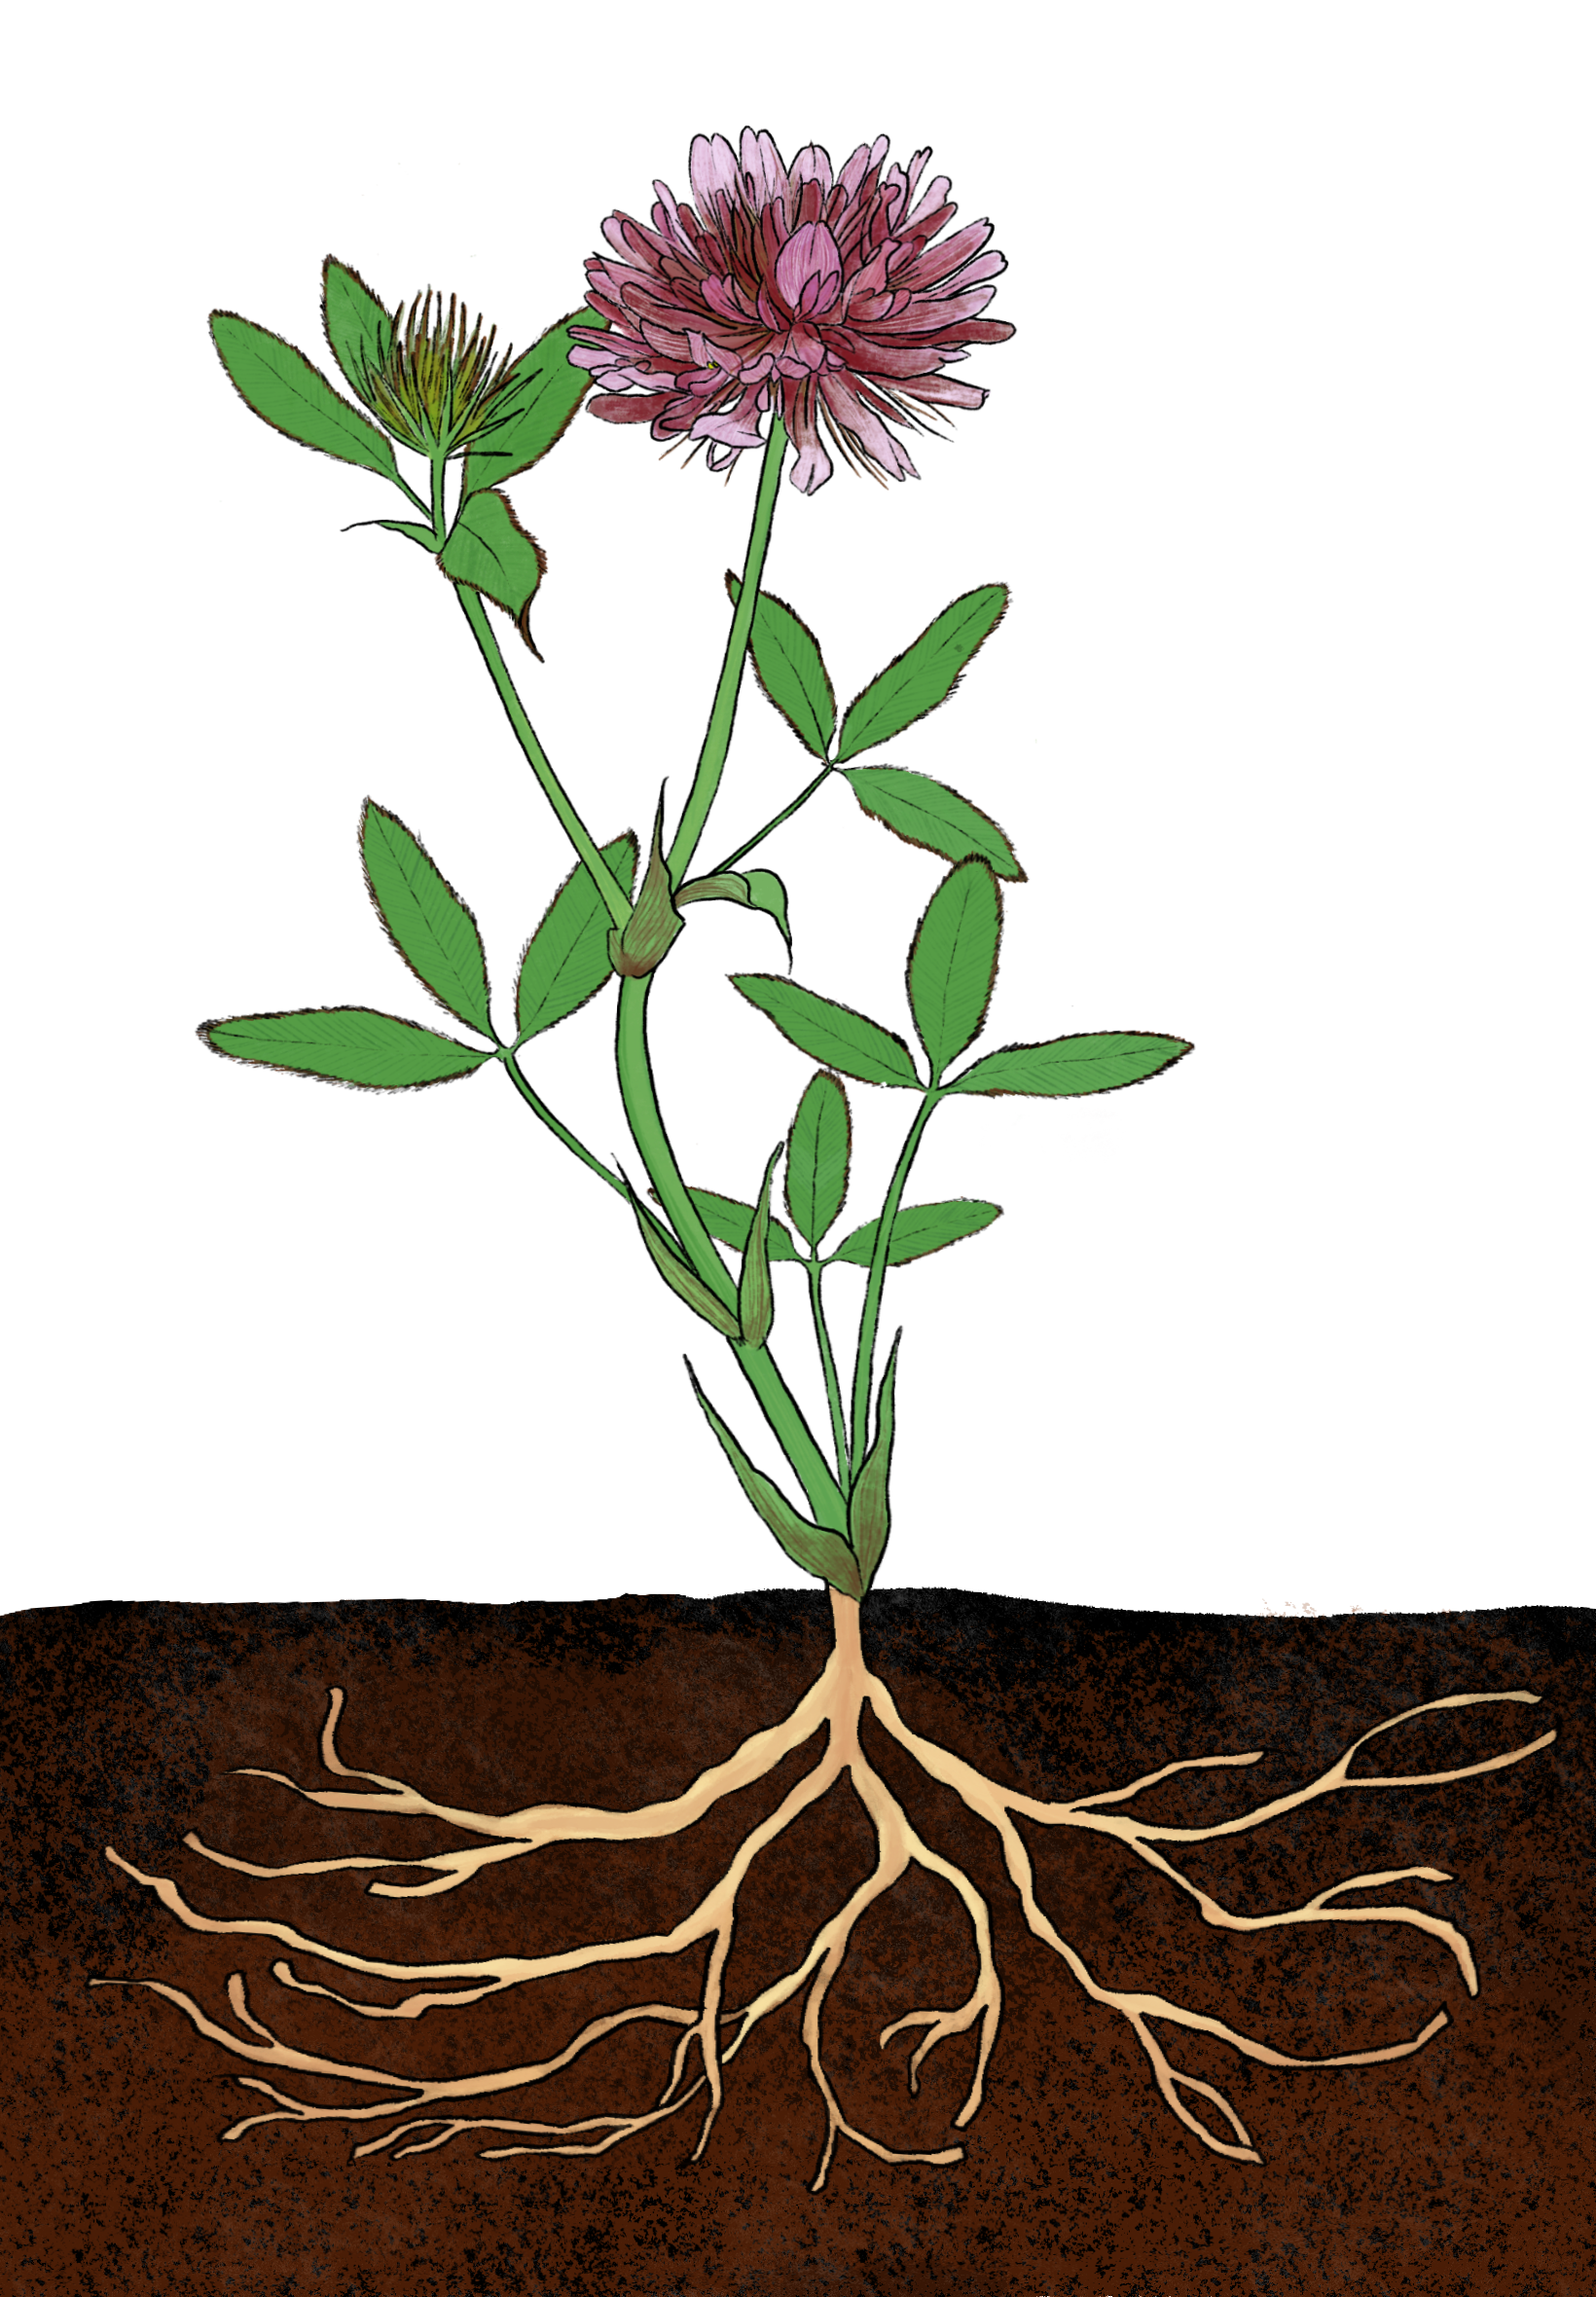 Springbank clover - Illustrated by Lilly Crosby